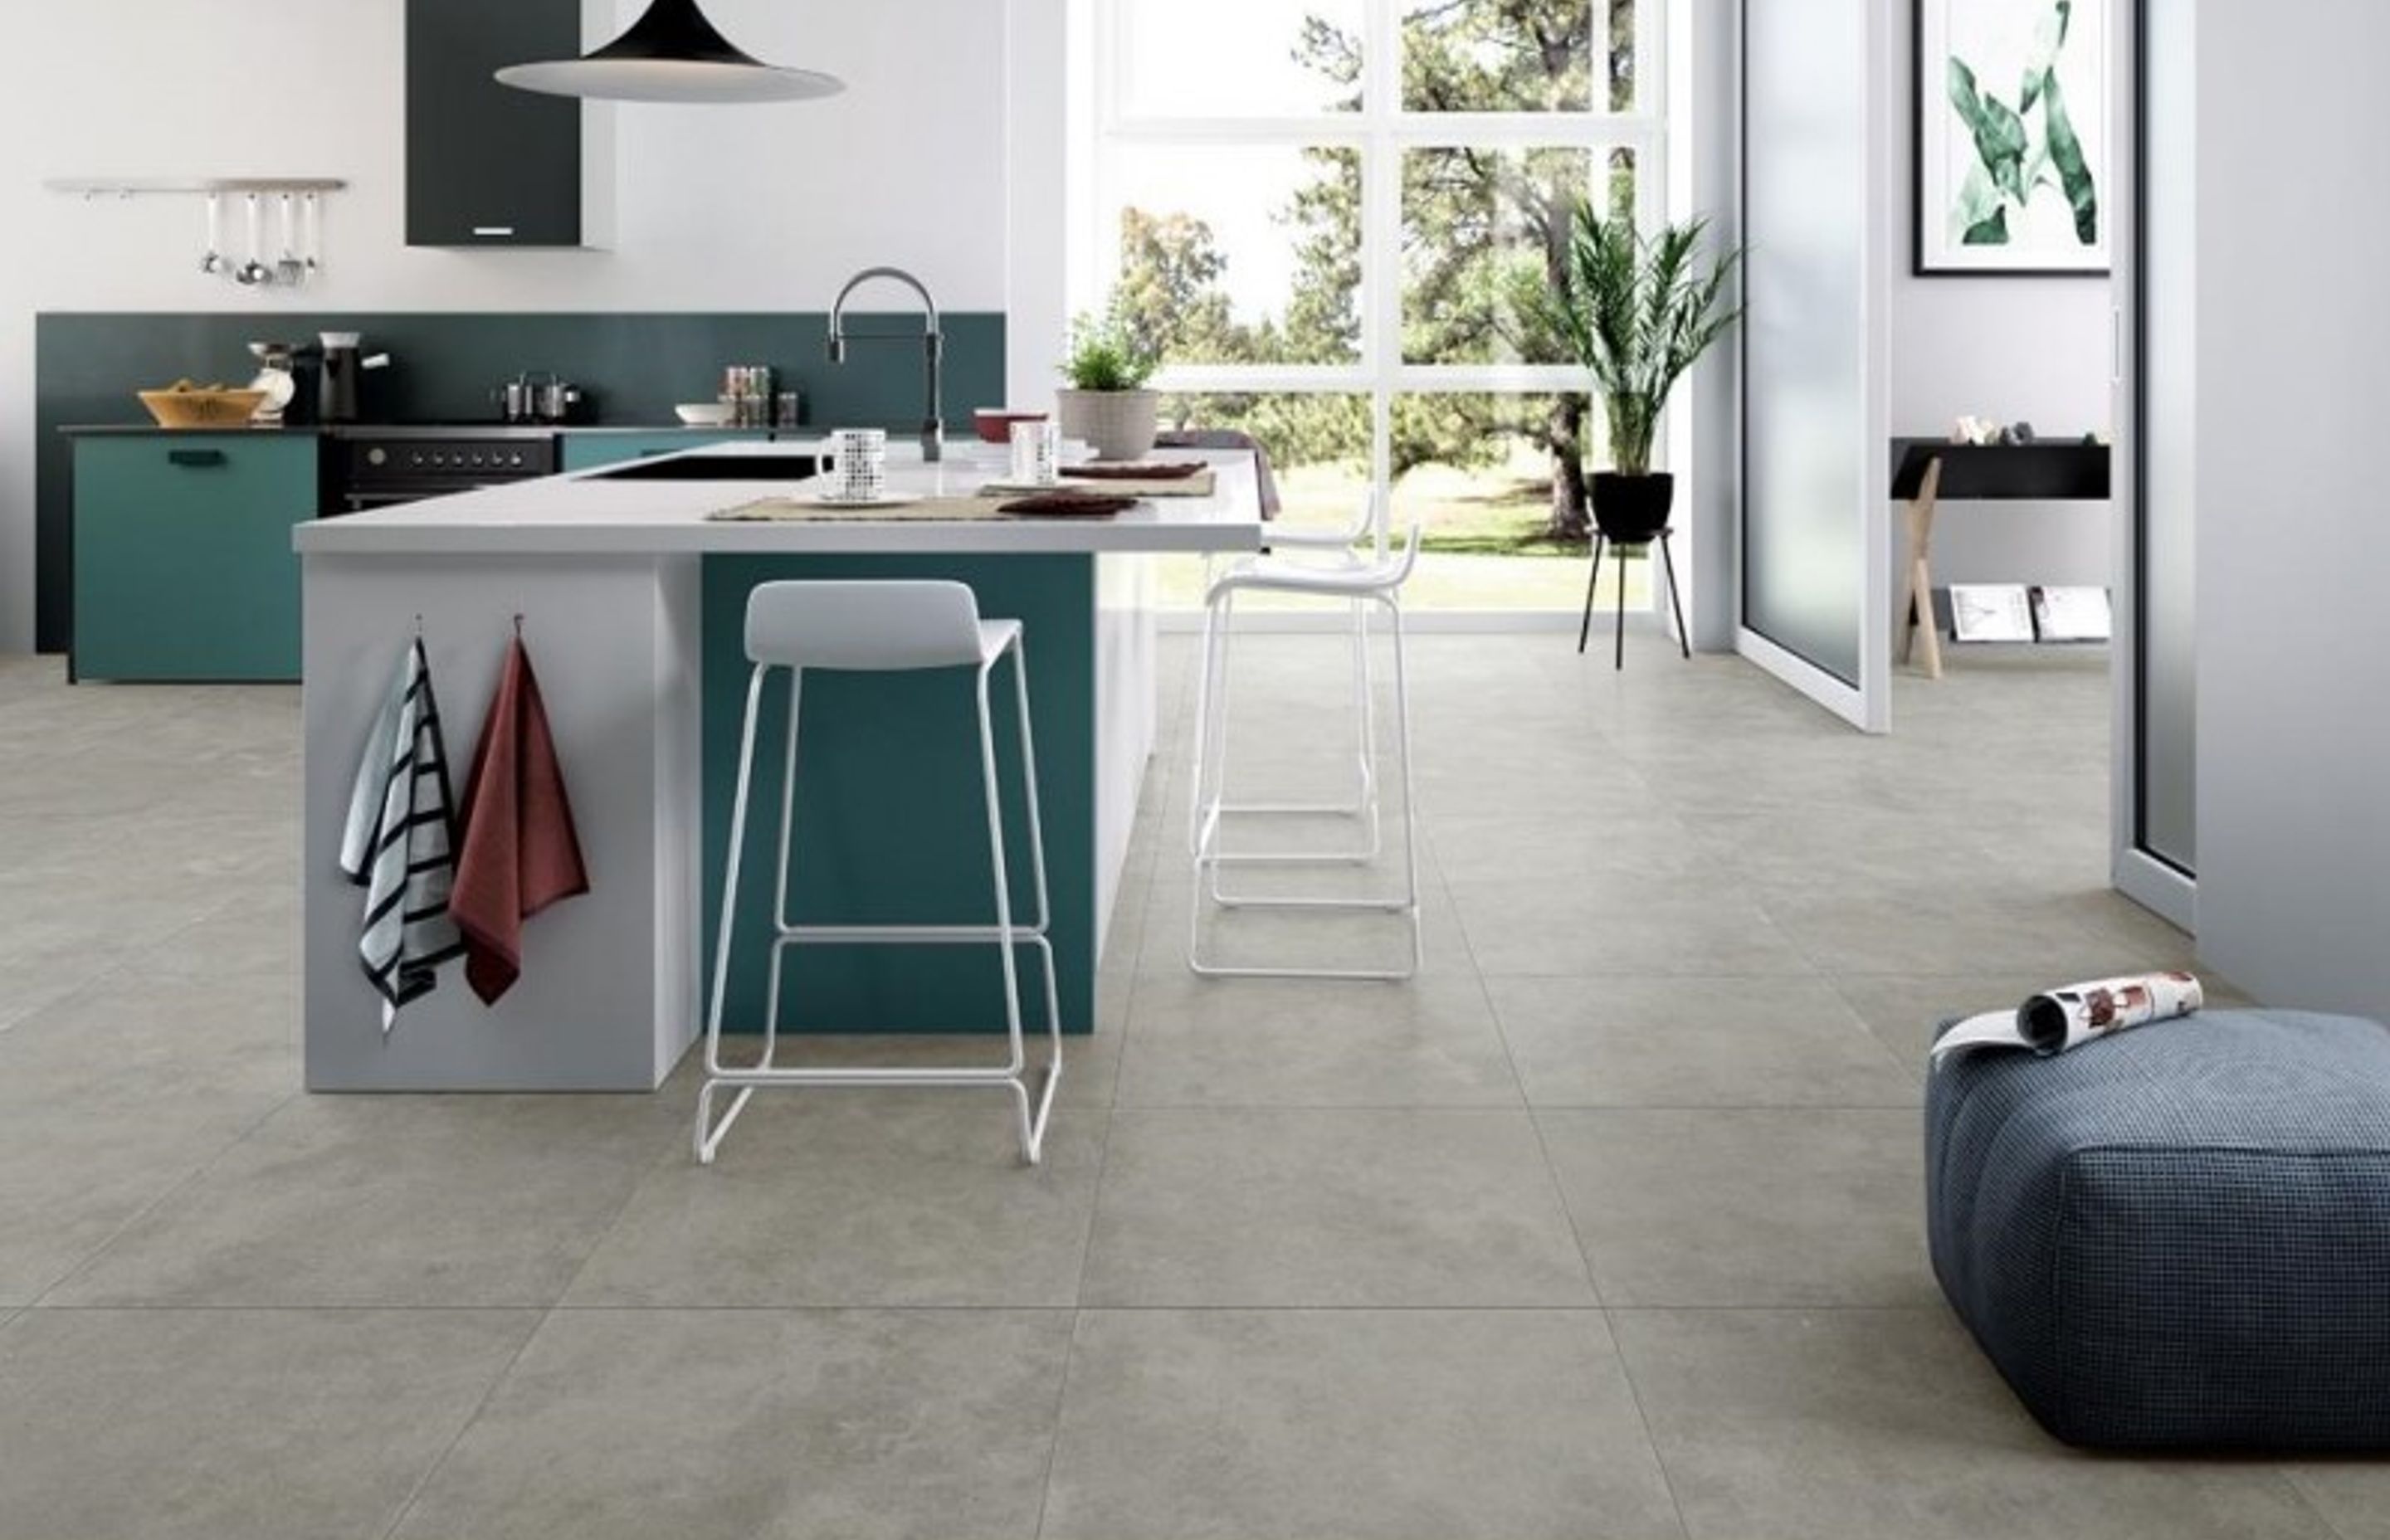 Another example of Glazed Porcelain tiles with a natural stone look. These matte tiles have been installed throughout the living area as well as the kitchen floors to give a unified look. (Tile Depot, 2021)